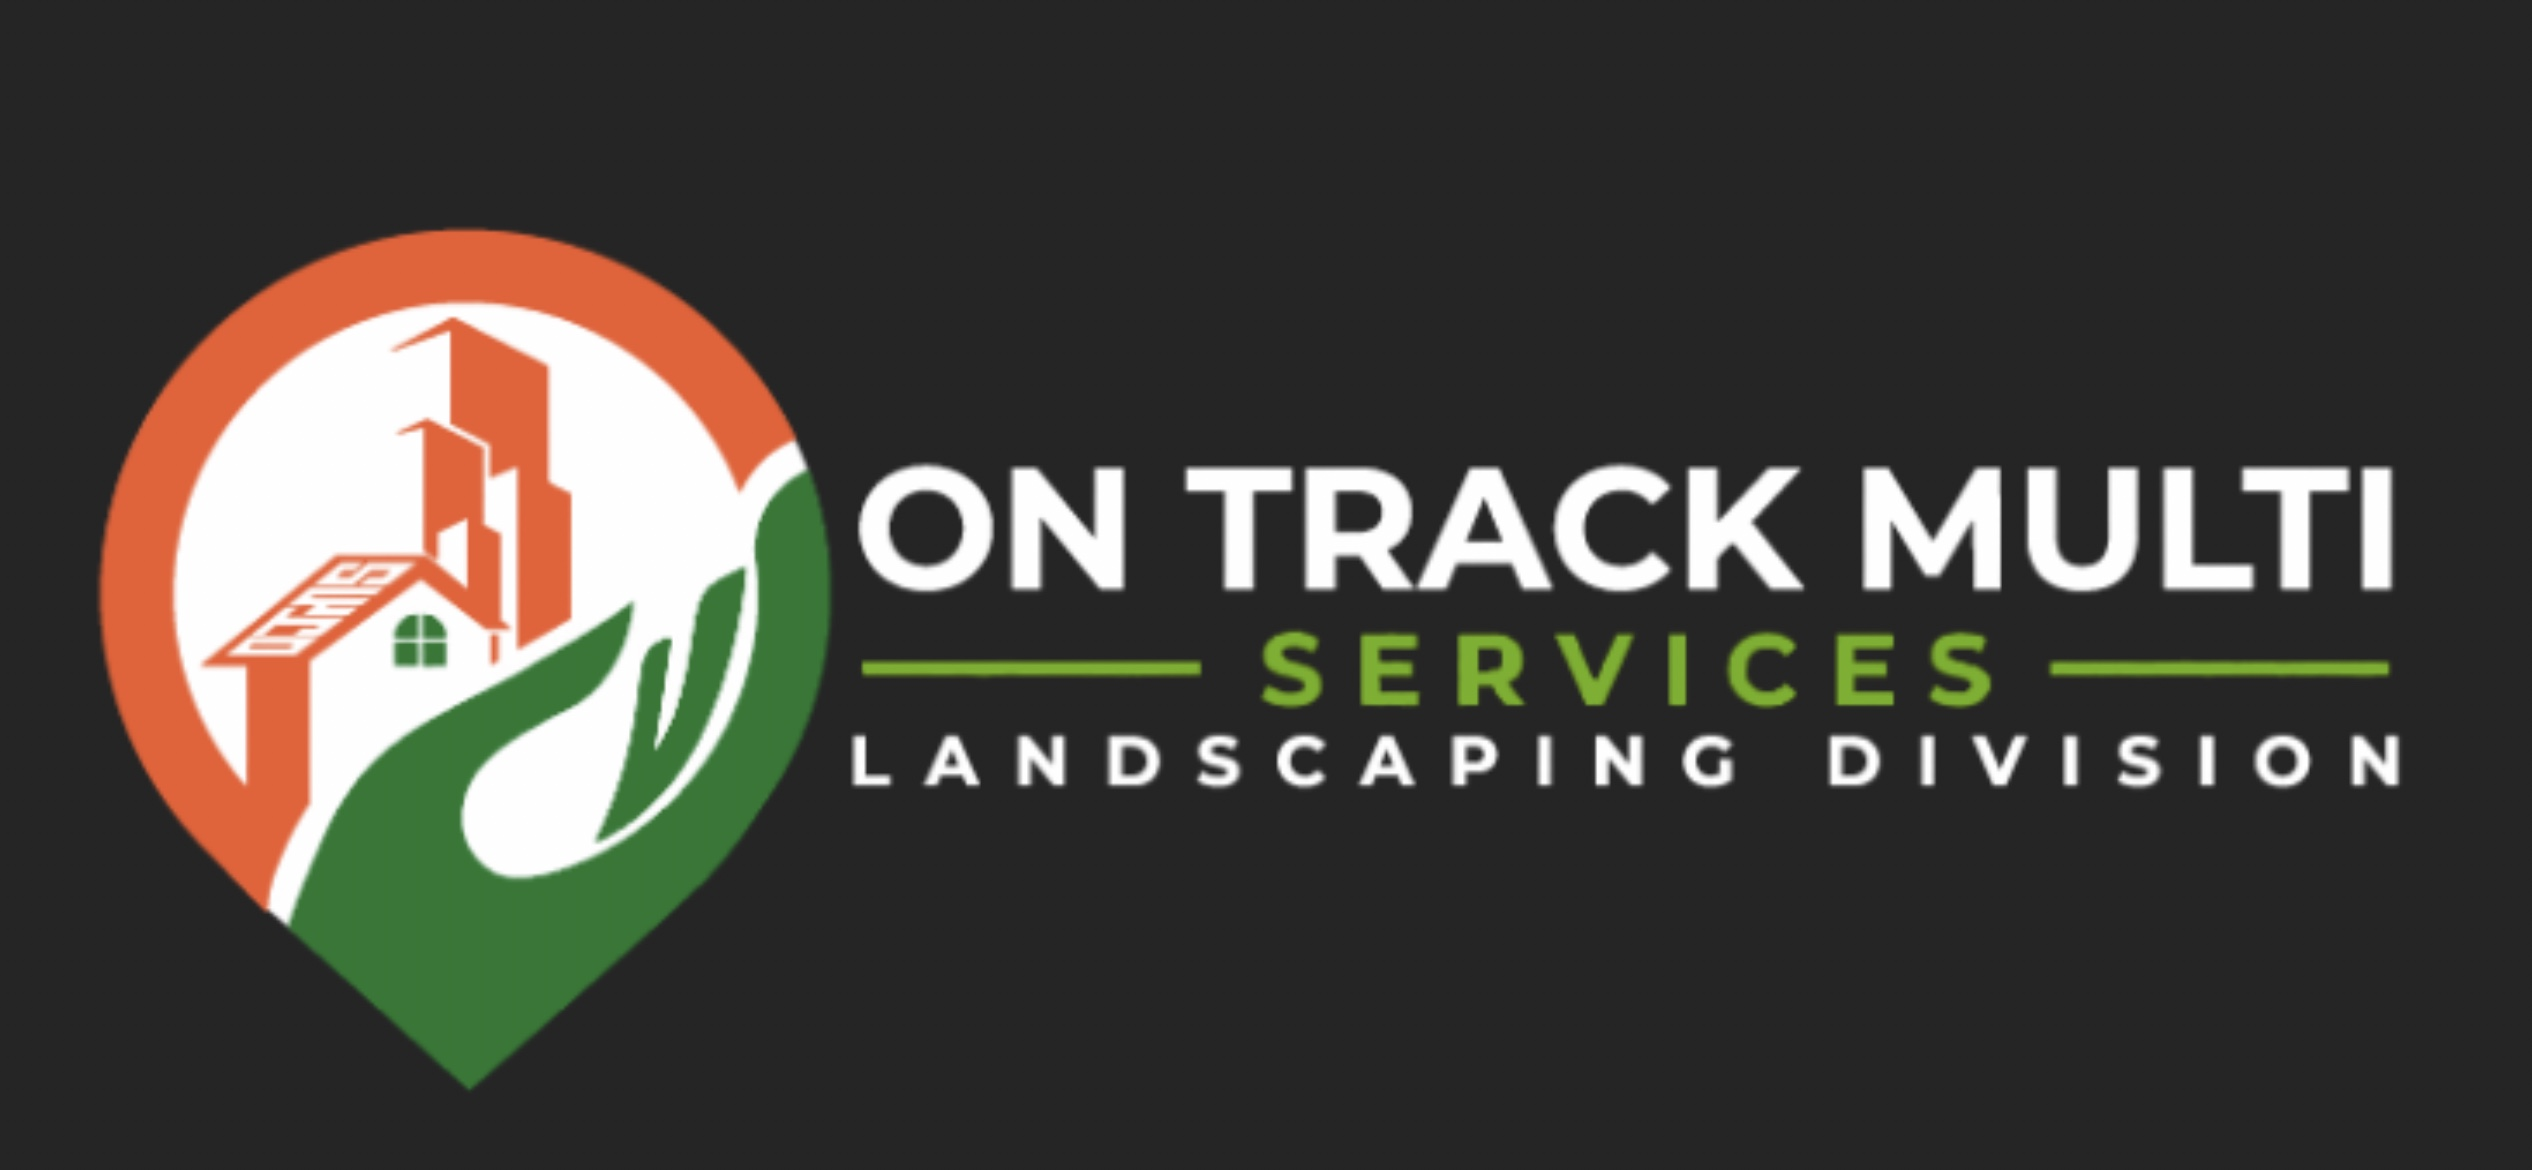 On Track Multi Services's logo